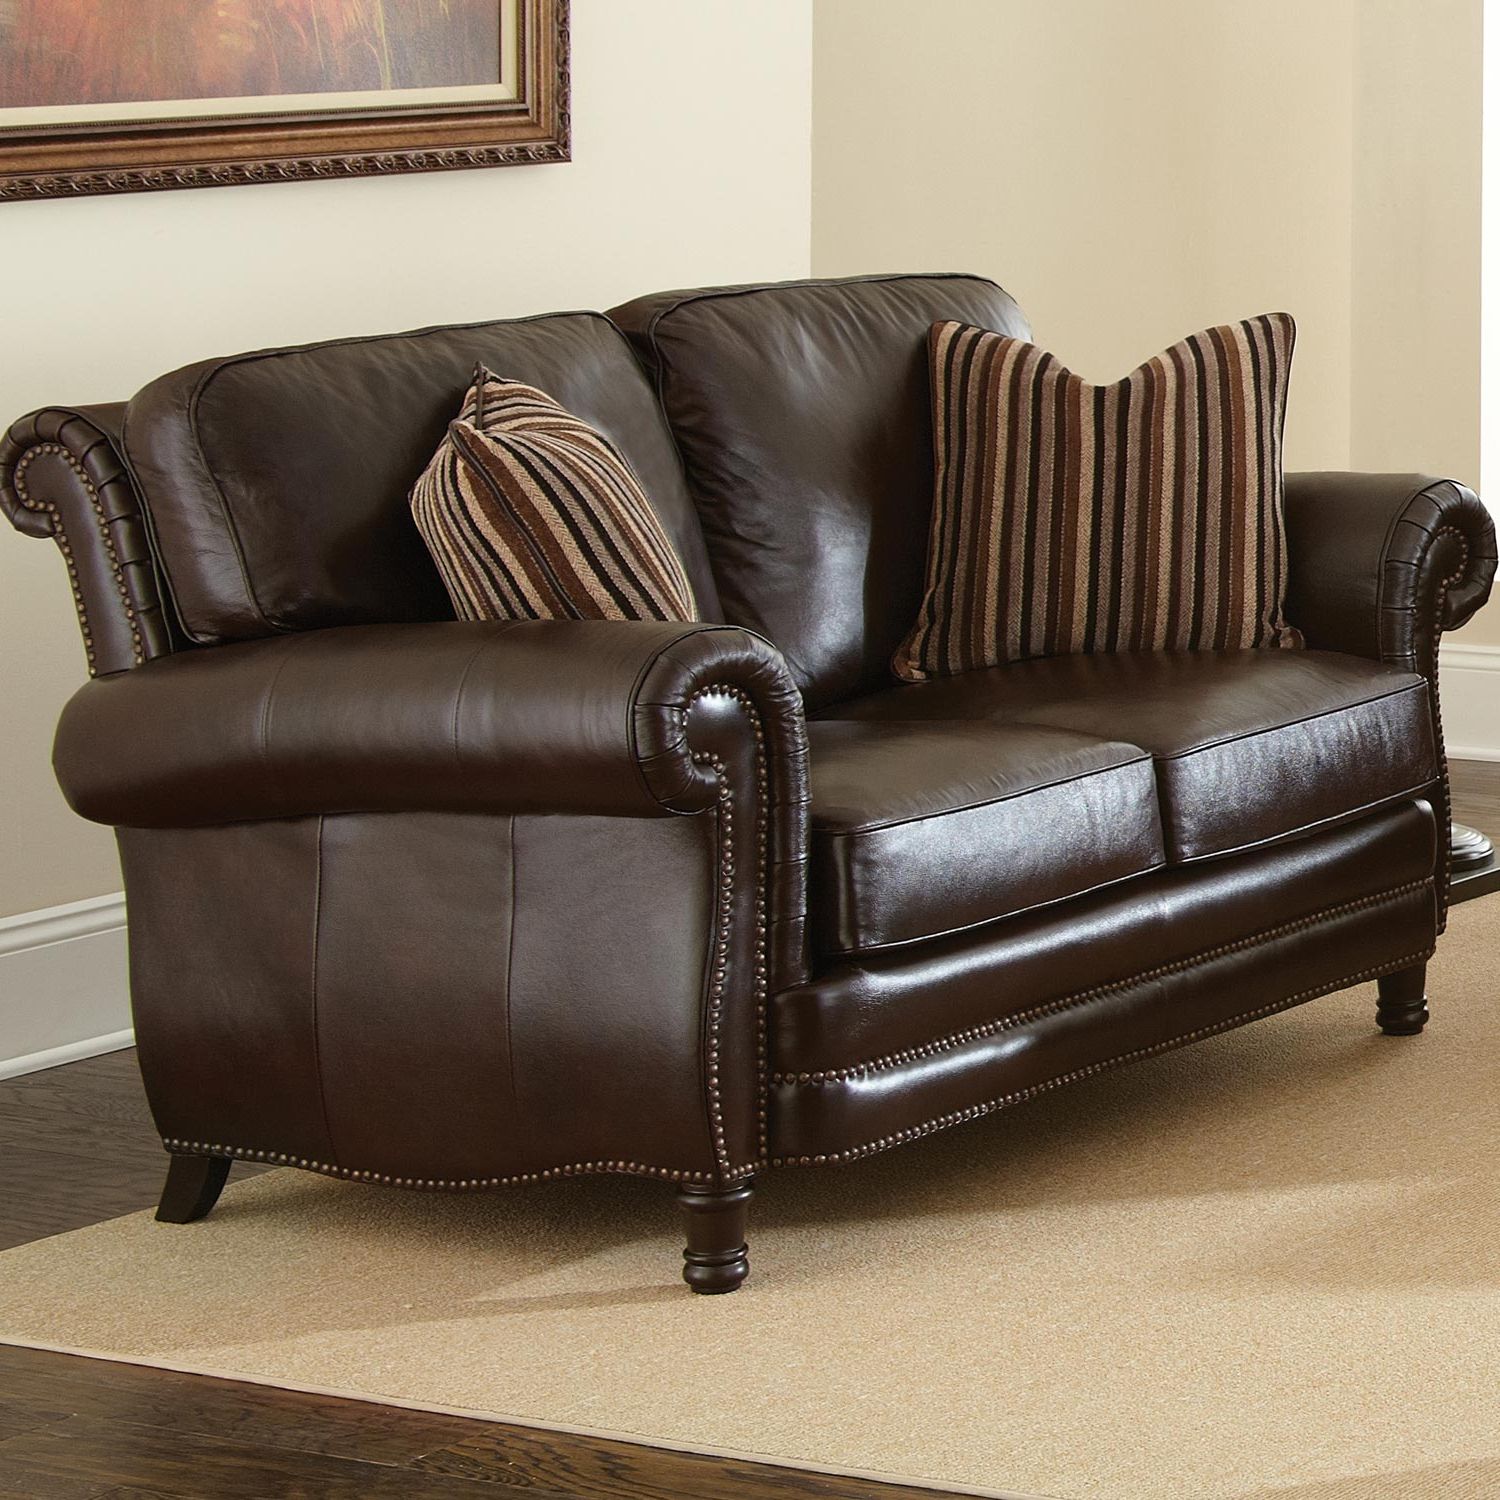 Faux Leather Sofas In Chocolate Brown Pertaining To Most Popular Chateau 3 Piece Leather Sofa Set – Antique Chocolate Brown (View 12 of 15)